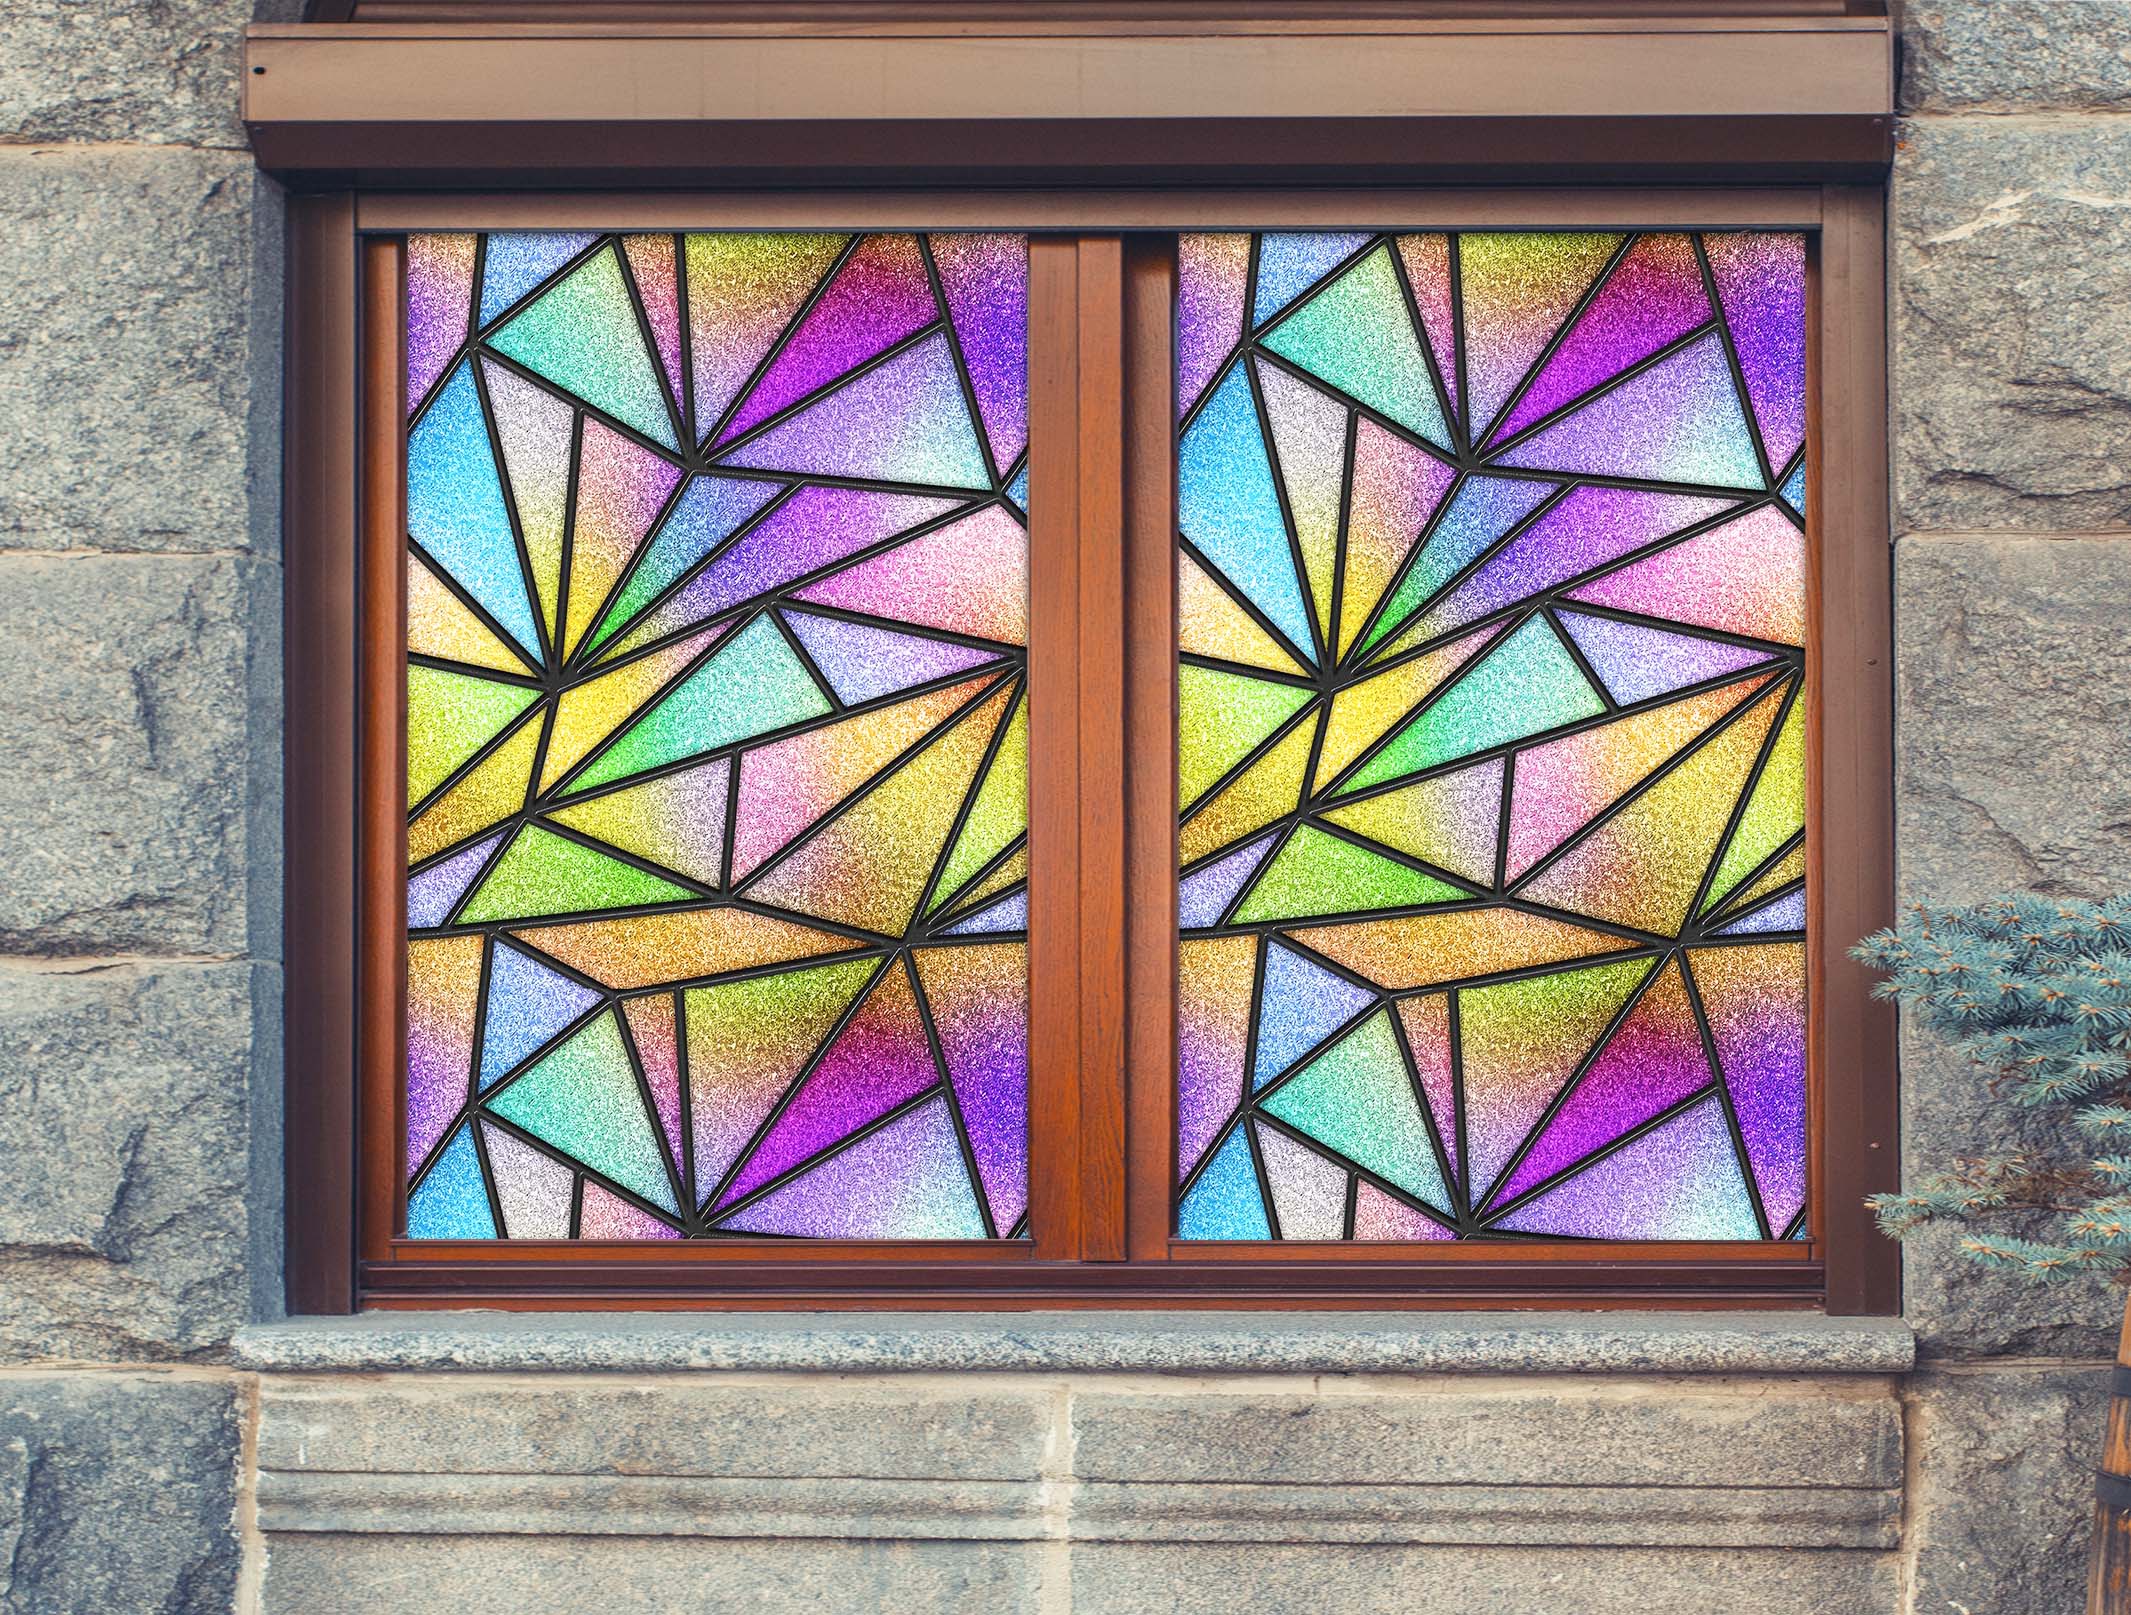 3D Triangle Square 104 Window Film Print Sticker Cling Stained Glass UV Block